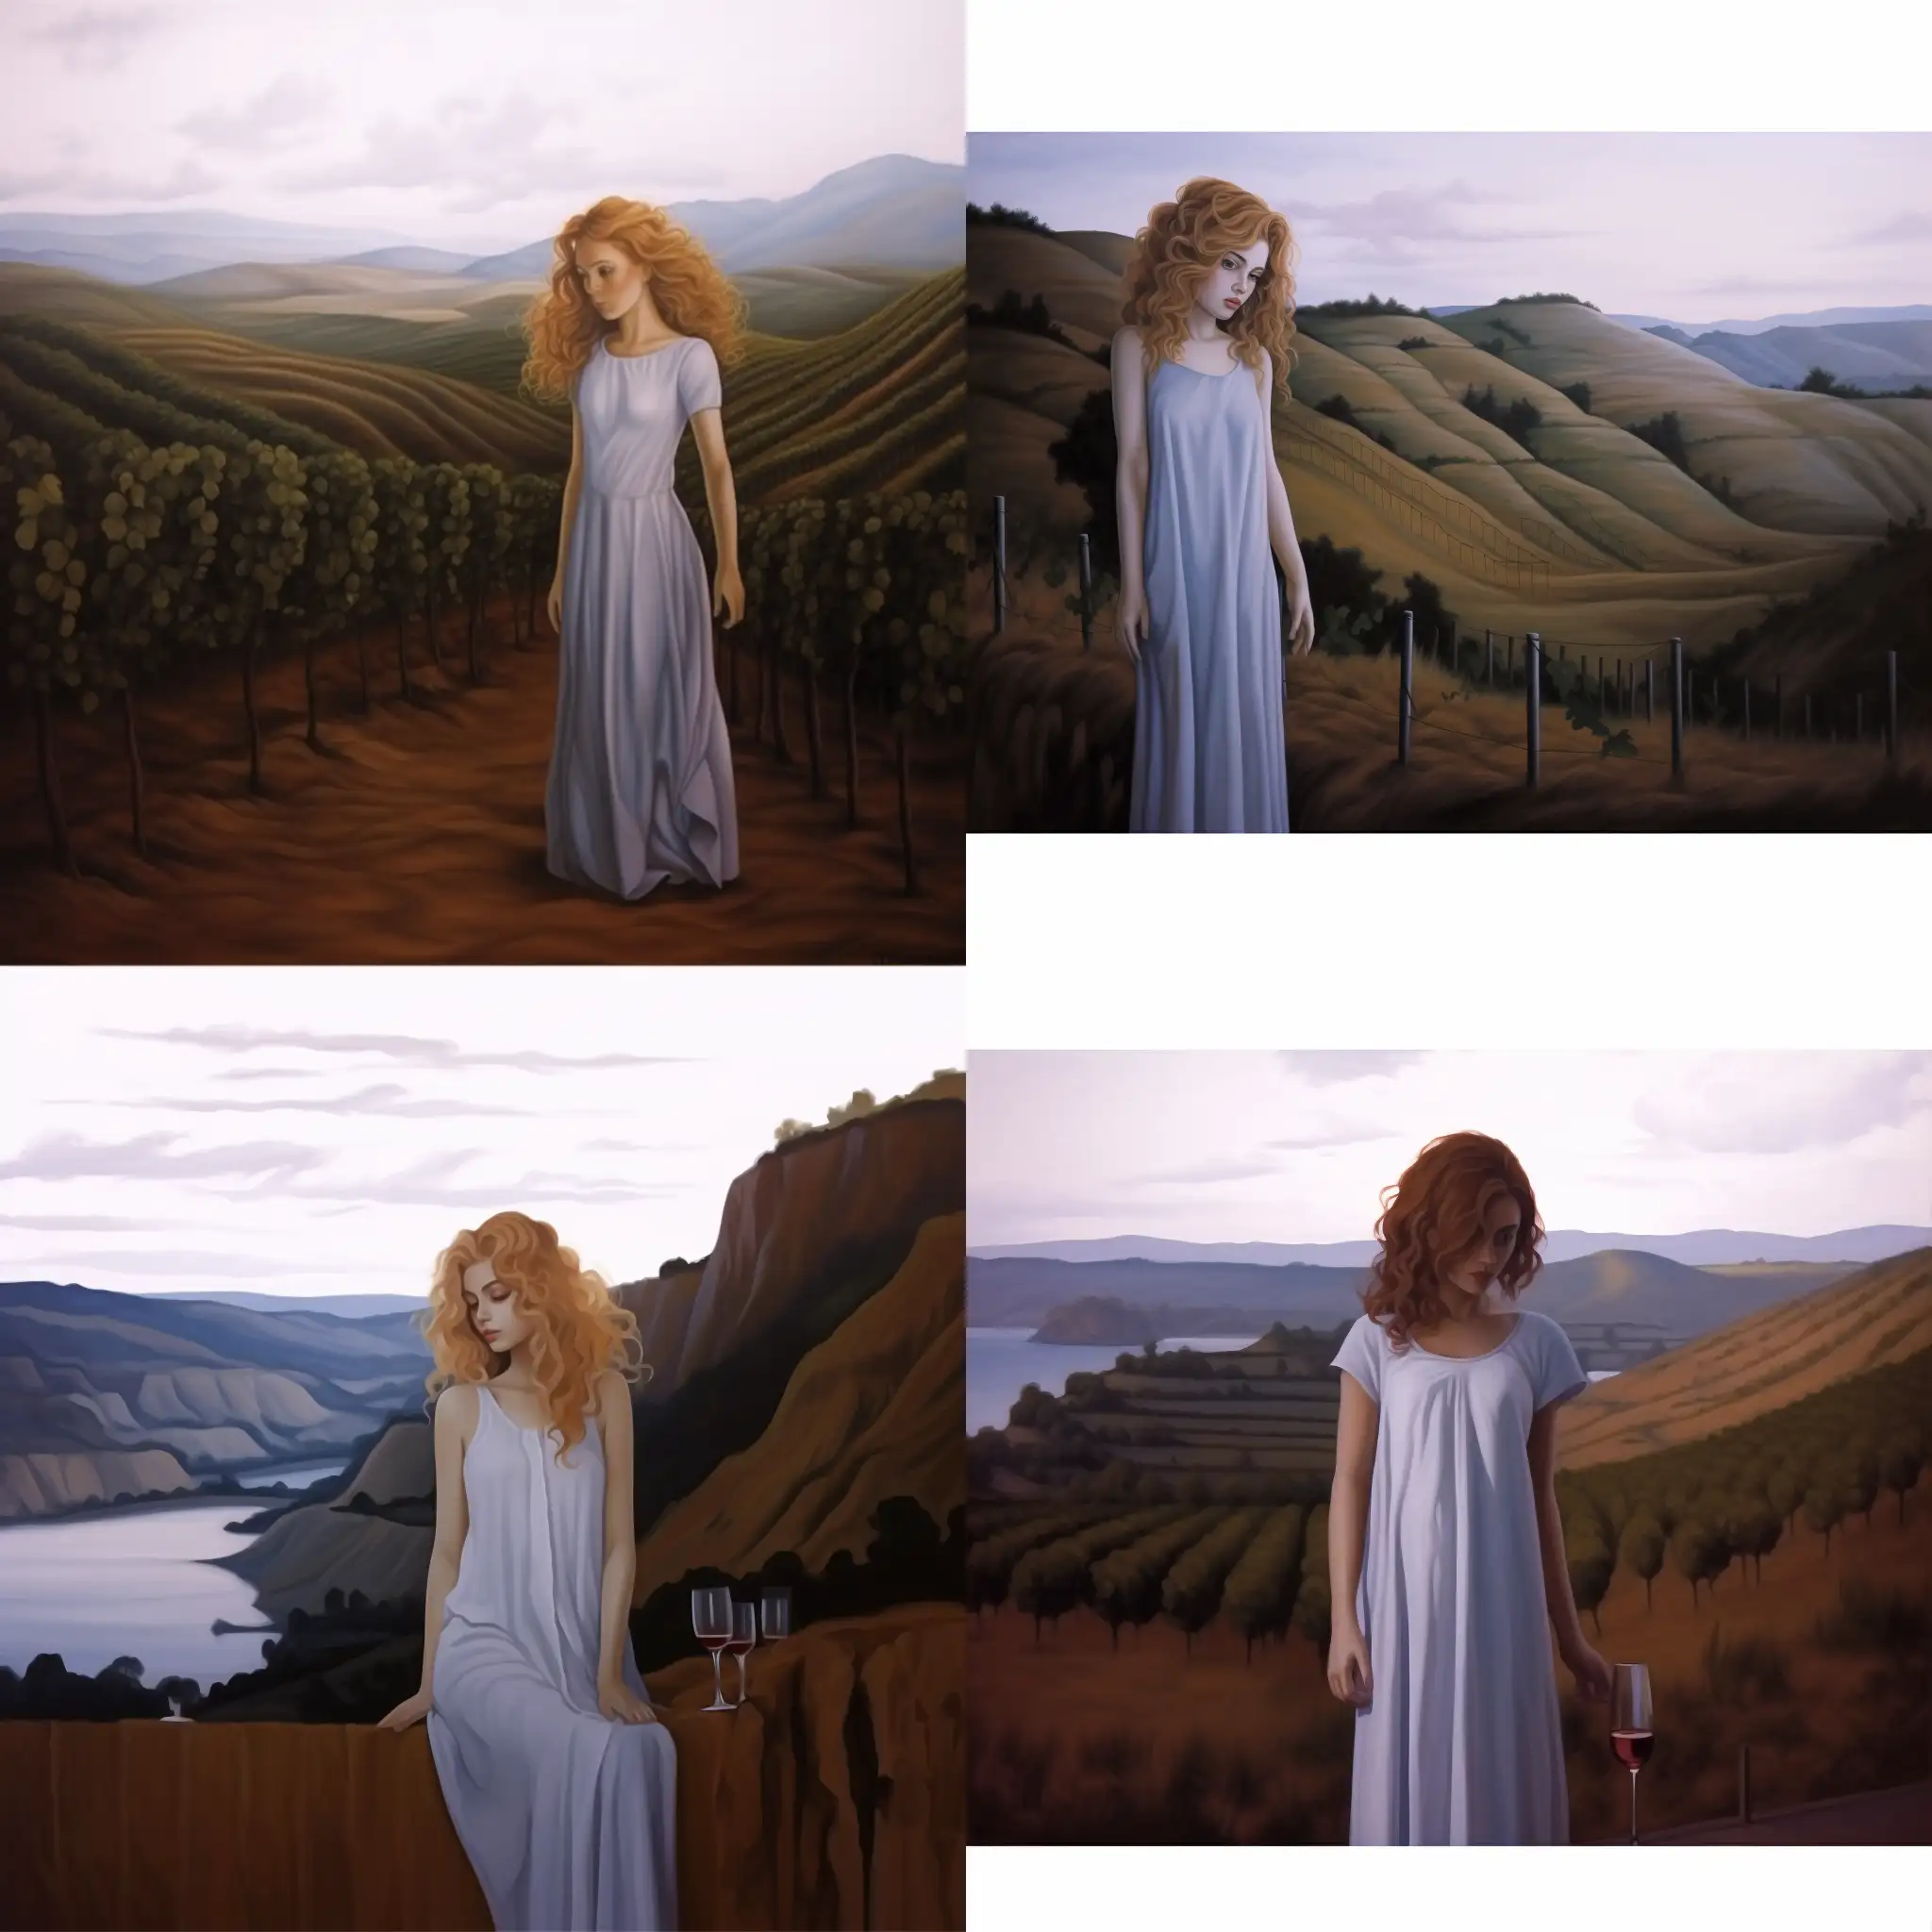 Blonde-CurlyHaired-Girl-in-White-Dress-Overlooking-Vineyard-with-Horse